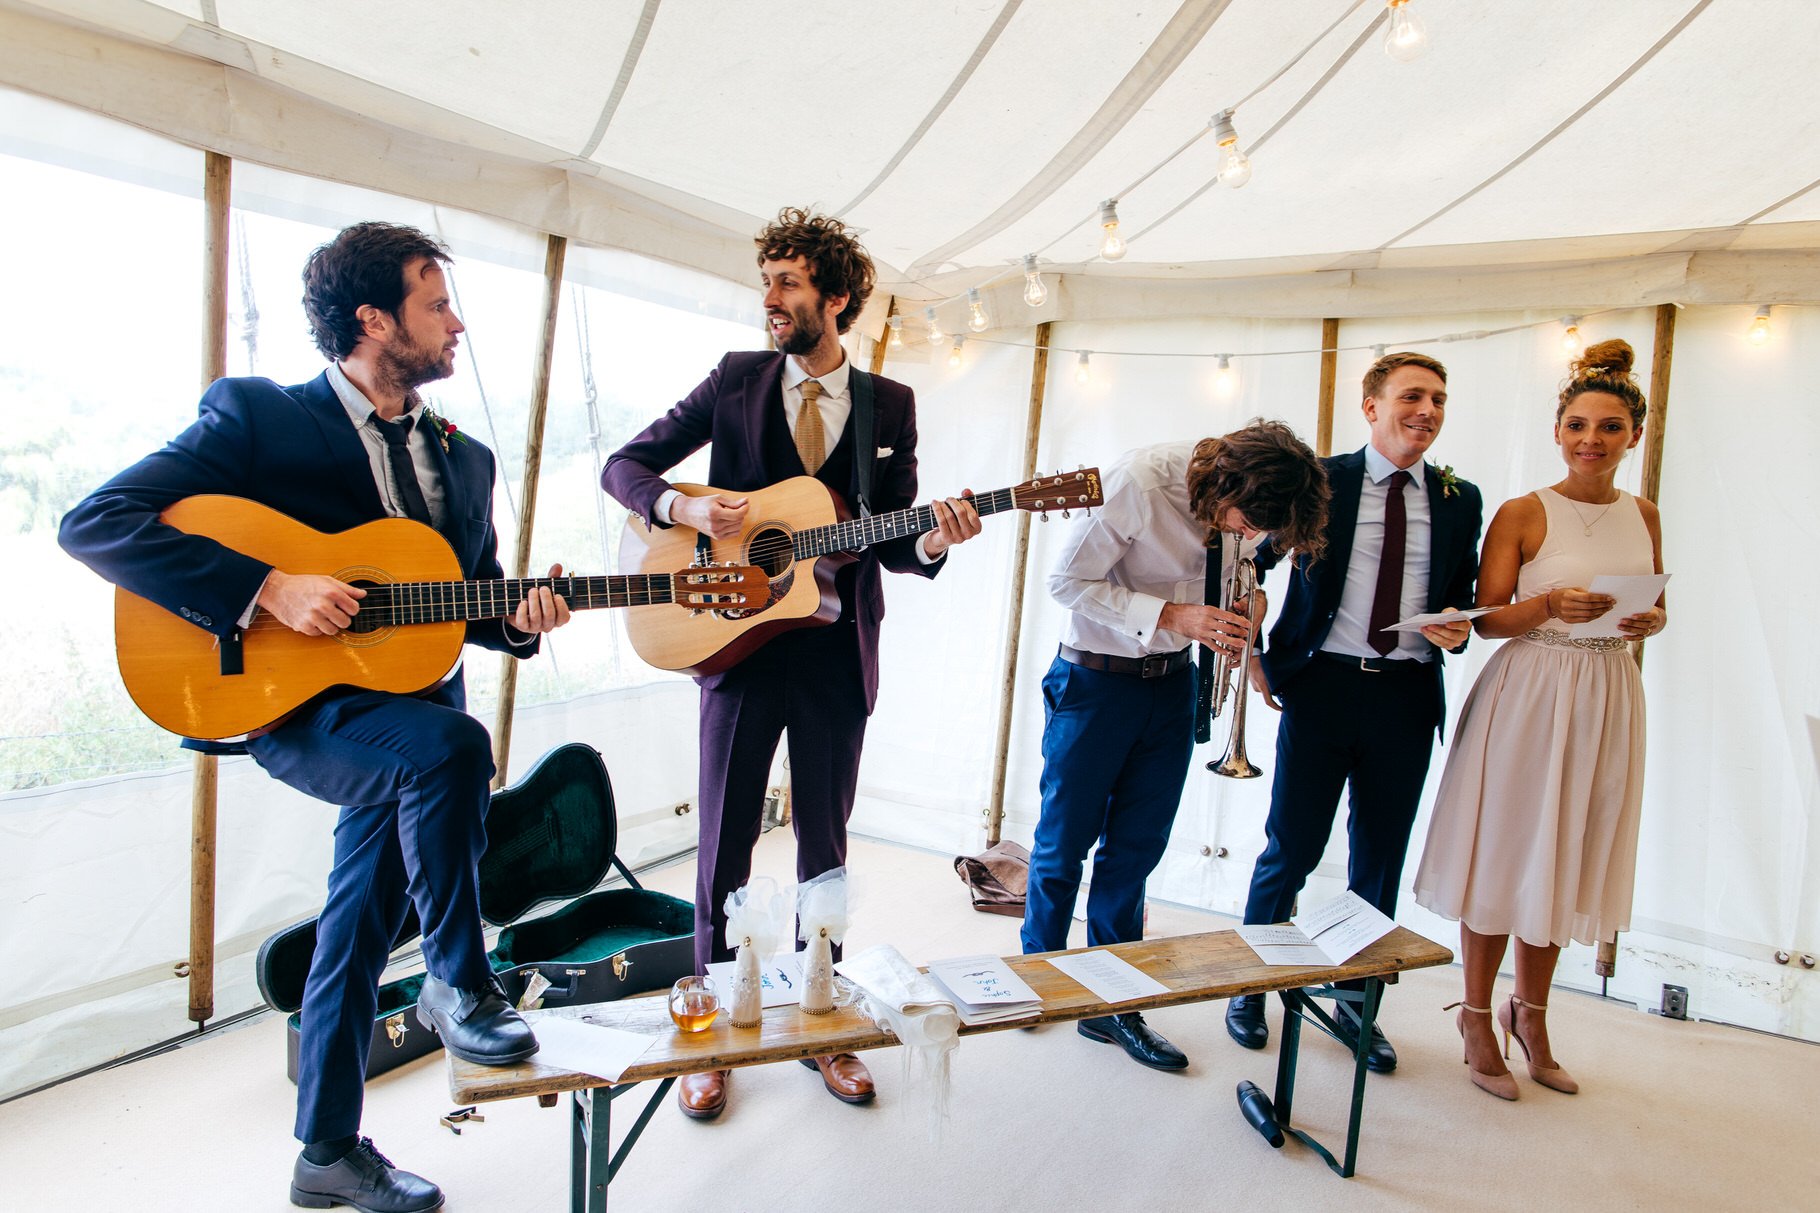 Musicians get ready to play their instruments in wedding tent